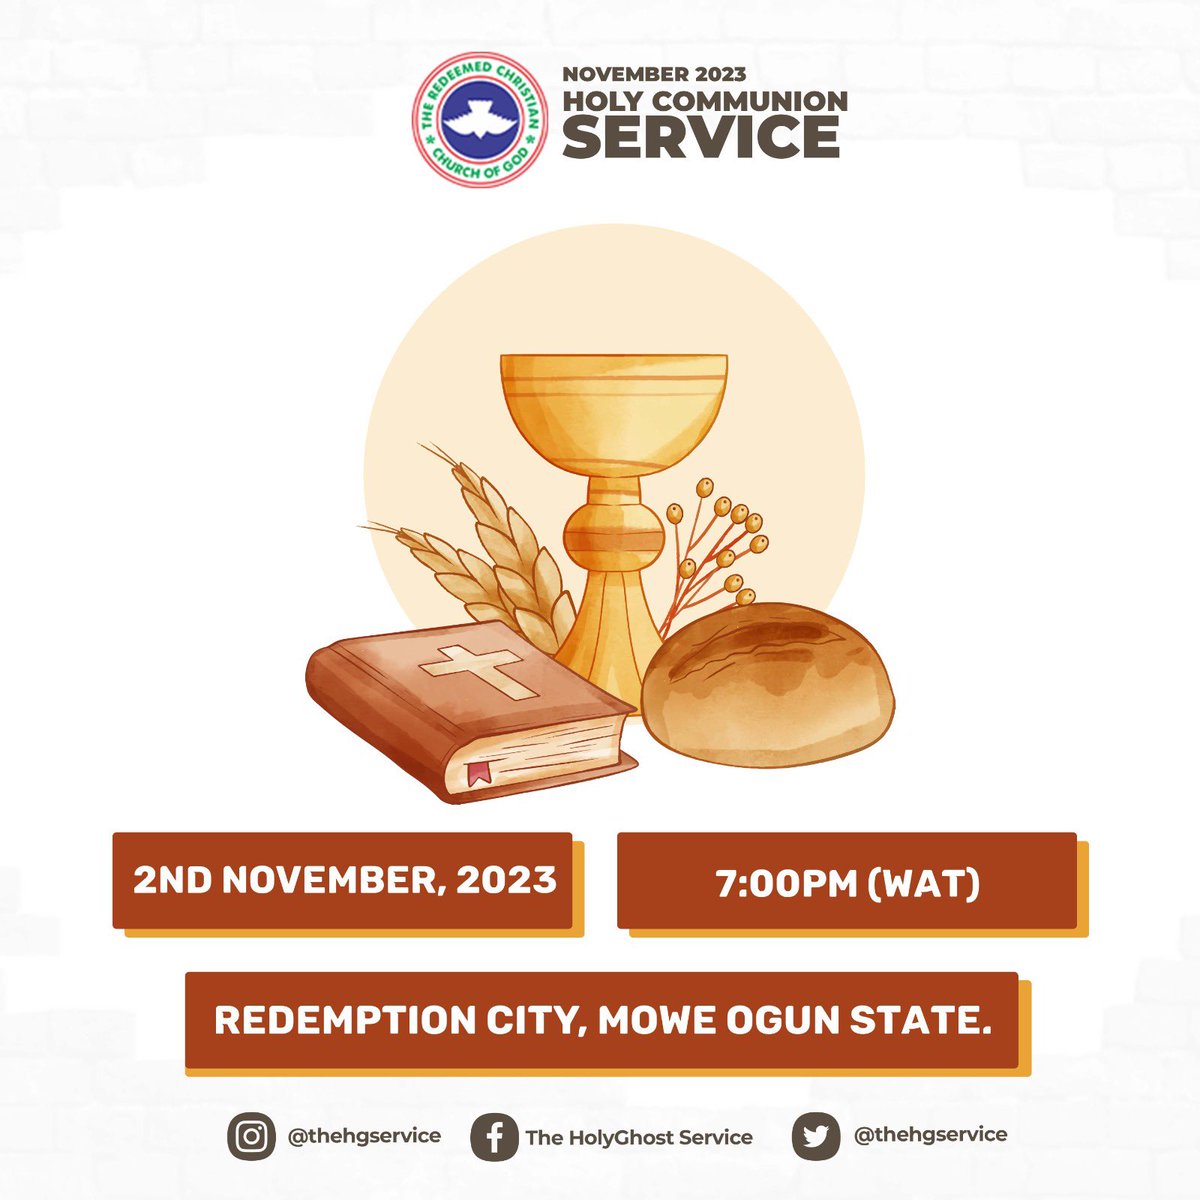 Join us for a time of fellowship at the Lord's table for the November 2023 Holy Communion Service. Date: Thursday, 2nd November 2023 Time: 7pm WAT Venue: Redemption City, Ogun State. Come, eat and be refreshed!